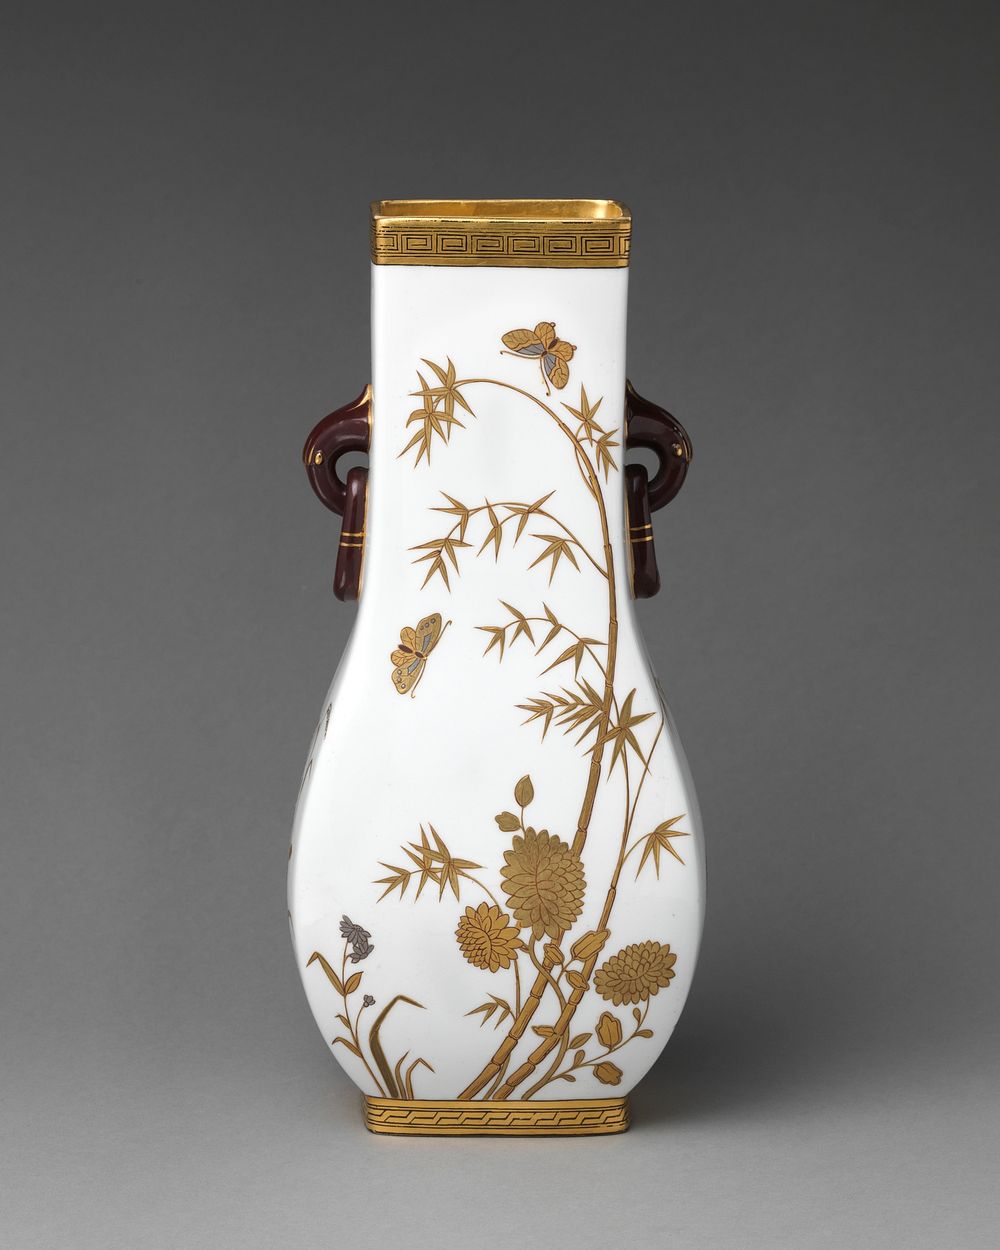 Vase with white and gold floral motifs and ring handles